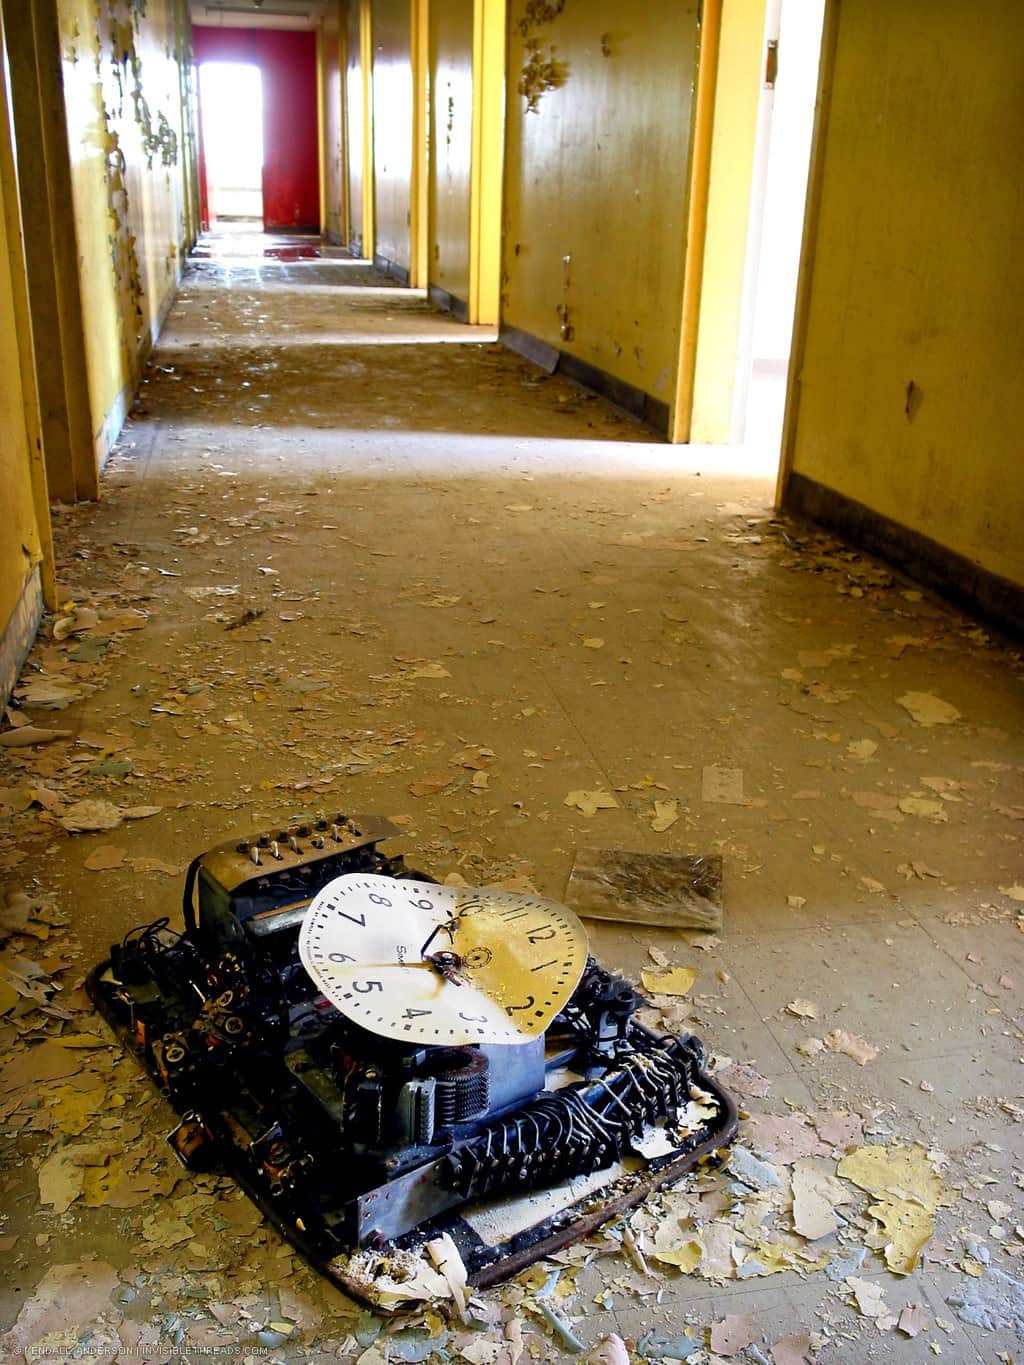 A long yellow hallway allows light to shine on to the floor. A large wall-mounted clock lies in the middle of the floor, broken. The floor is covered in debris and paint chips.